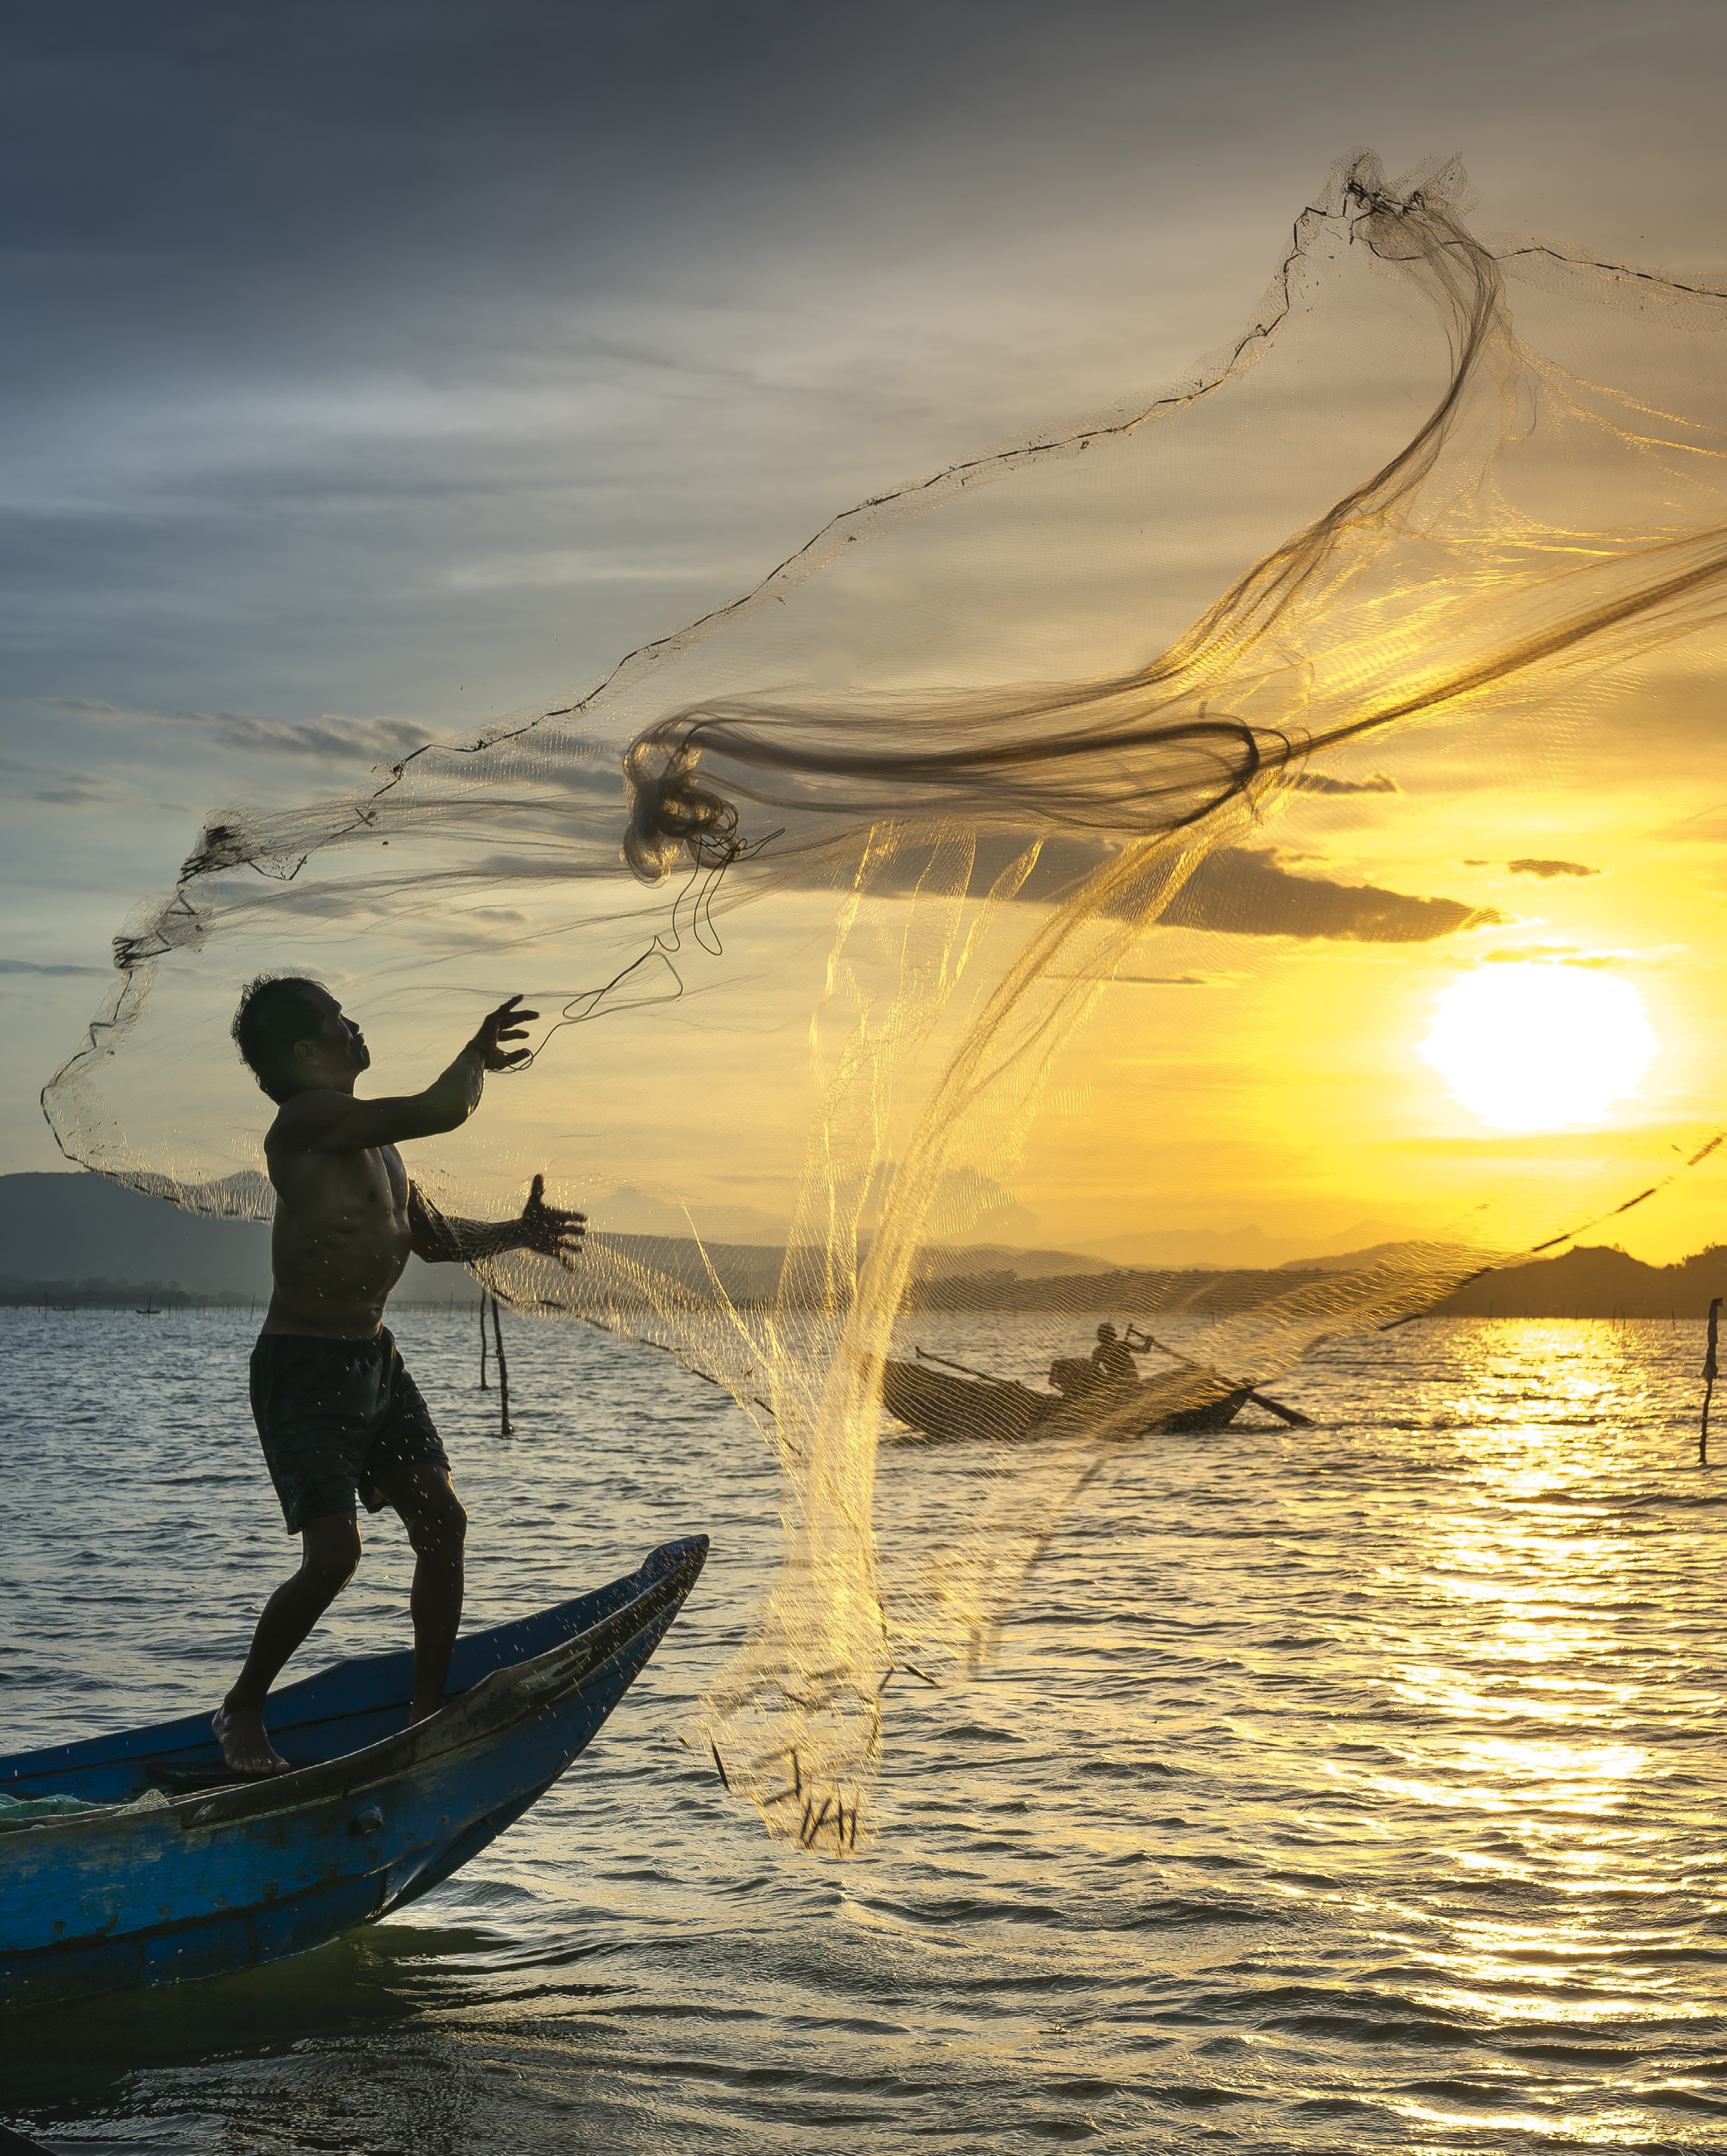 Ancient fishing practices as part of the tangible and intangible cultural heritage of the oceans (Source: Pixabay, 2018).